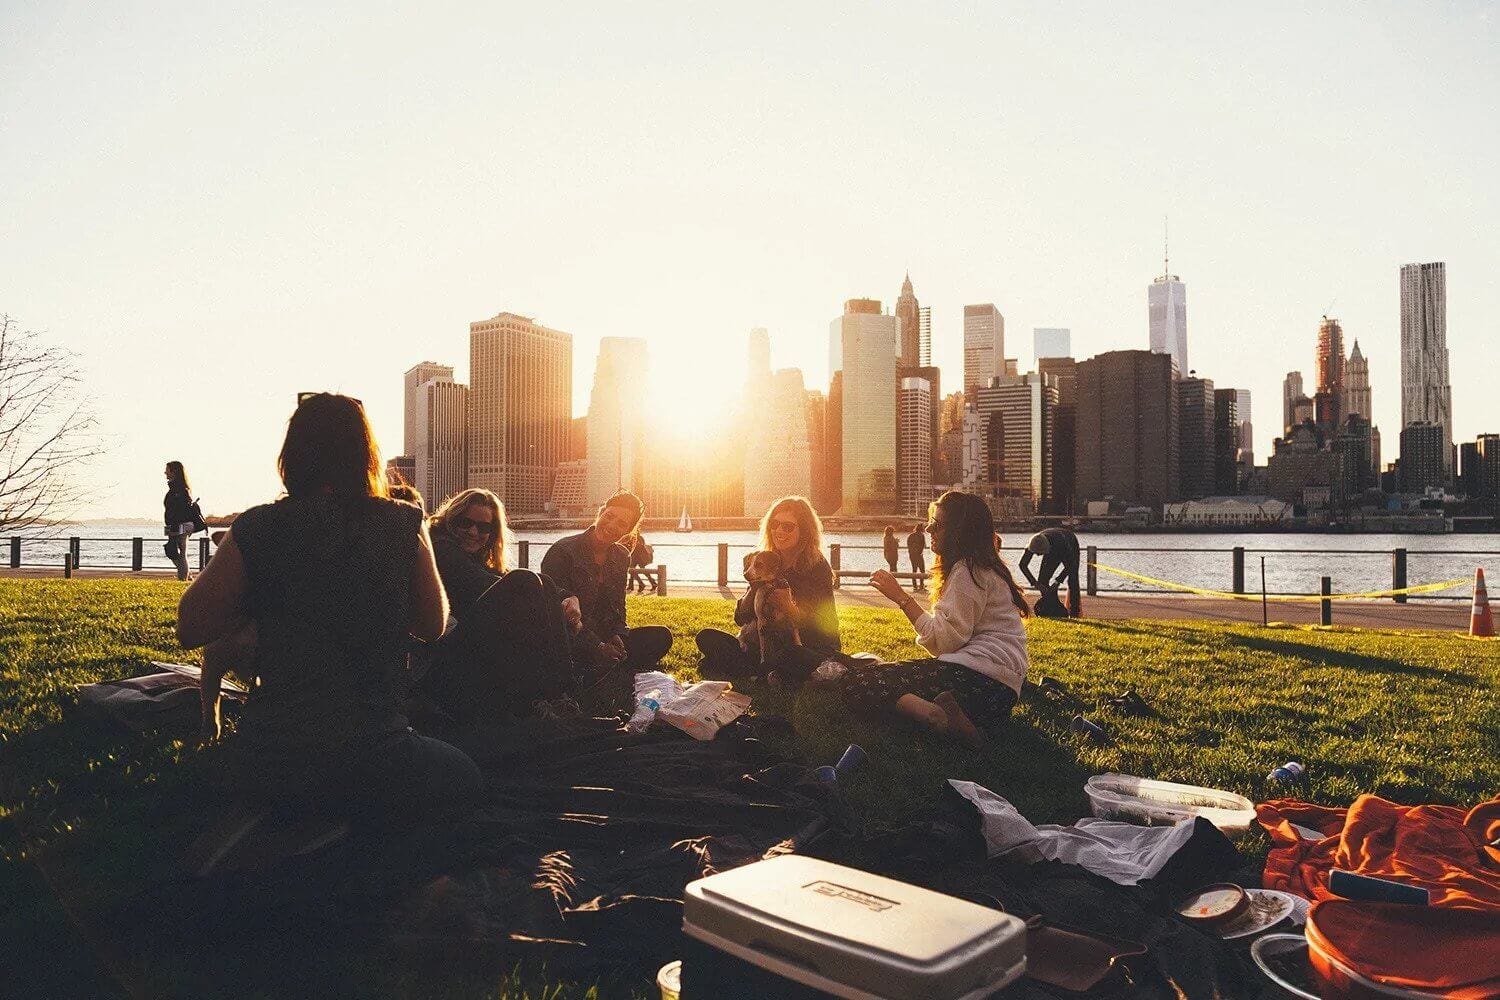 People sitting in grass with skyline behind them